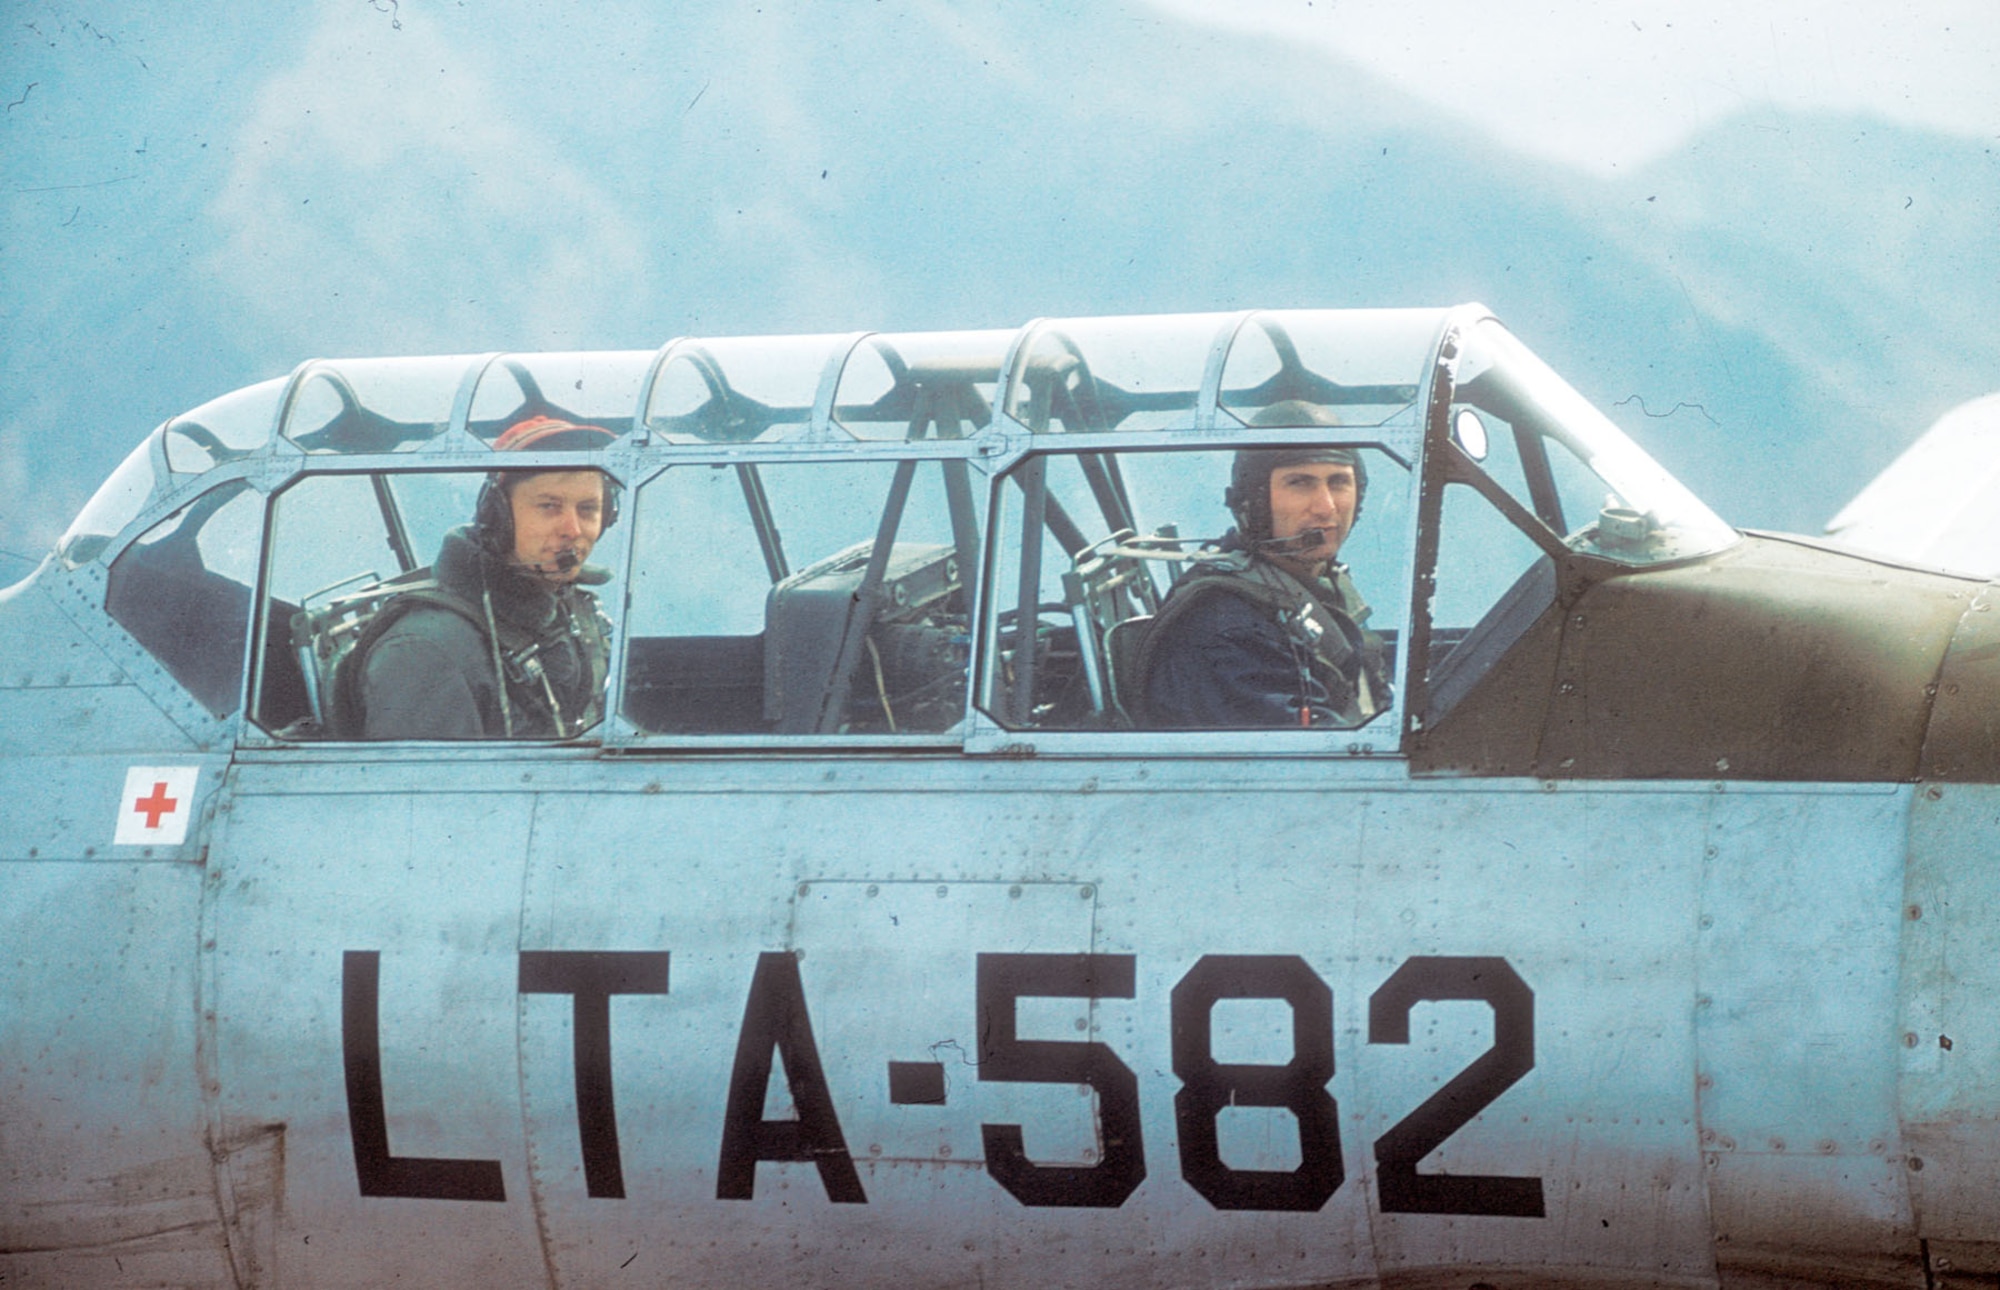 A Mosquito crew consisted of a USAF pilot in front and an observer in back. The observer could be an Air Force officer, or a U.S. or UN soldier familiar with the local geography. (U.S. Air Force photo)